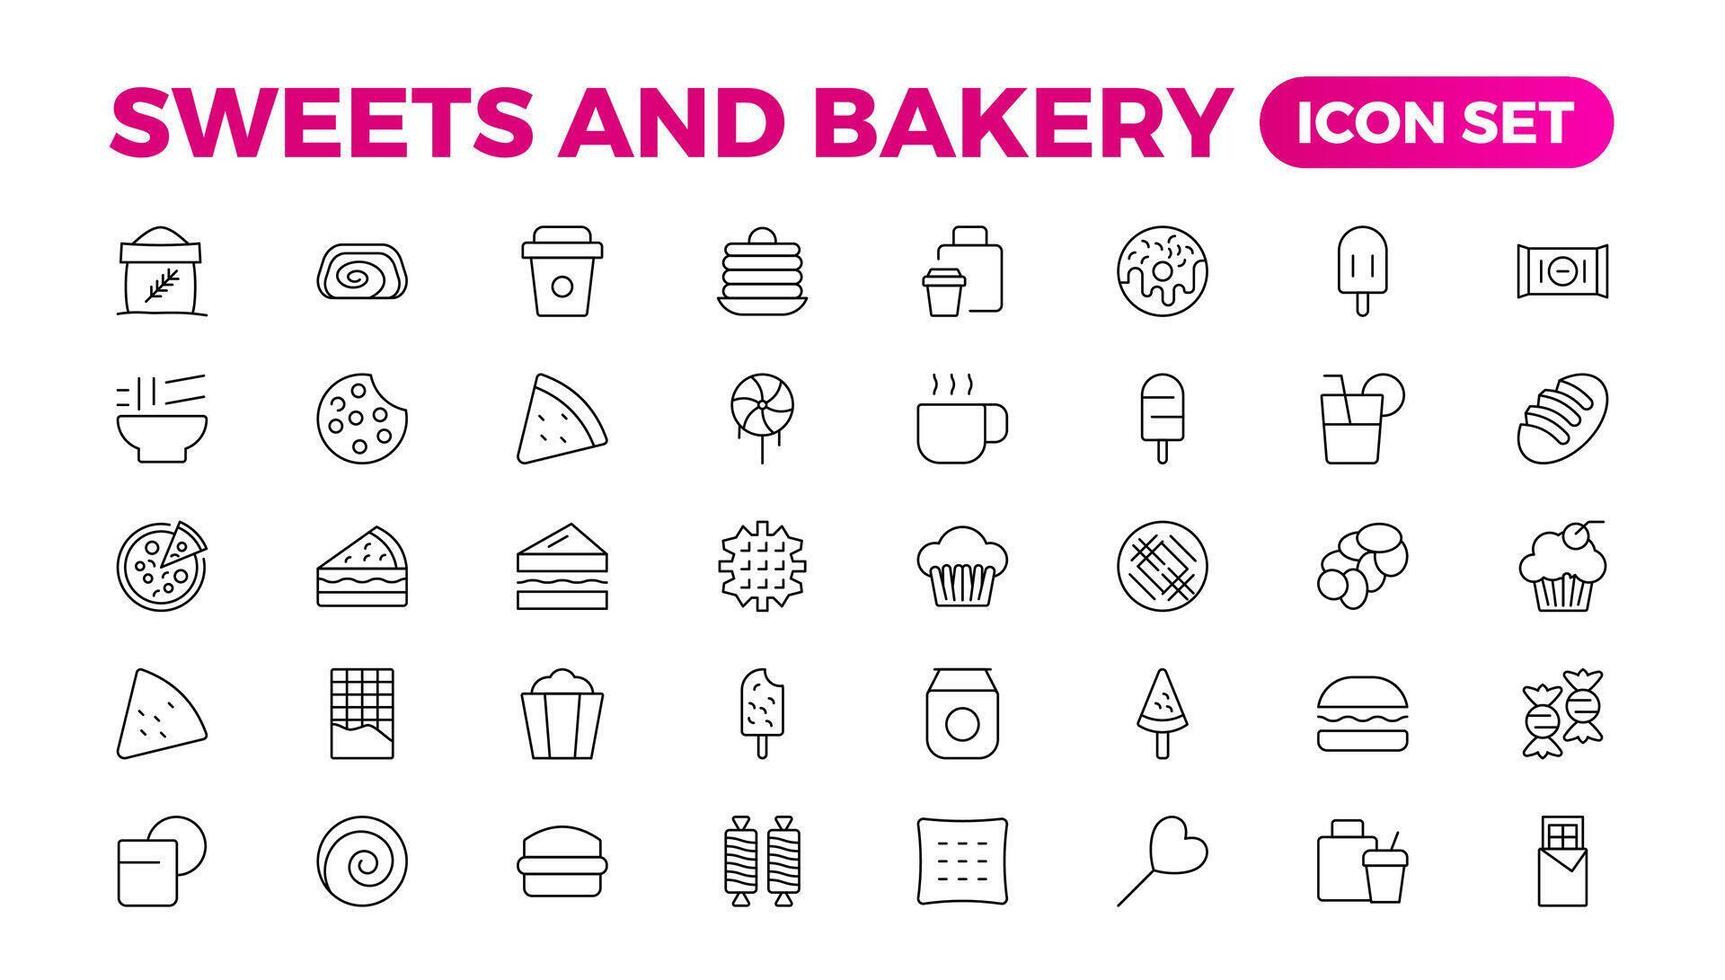 Sweets and Bakery icon set. Food icon collection. Containing meal, restaurant, dishes, and fruit icons. Set of outline icons related to food and drink. Linear icon collection. Outline icon collection. vector